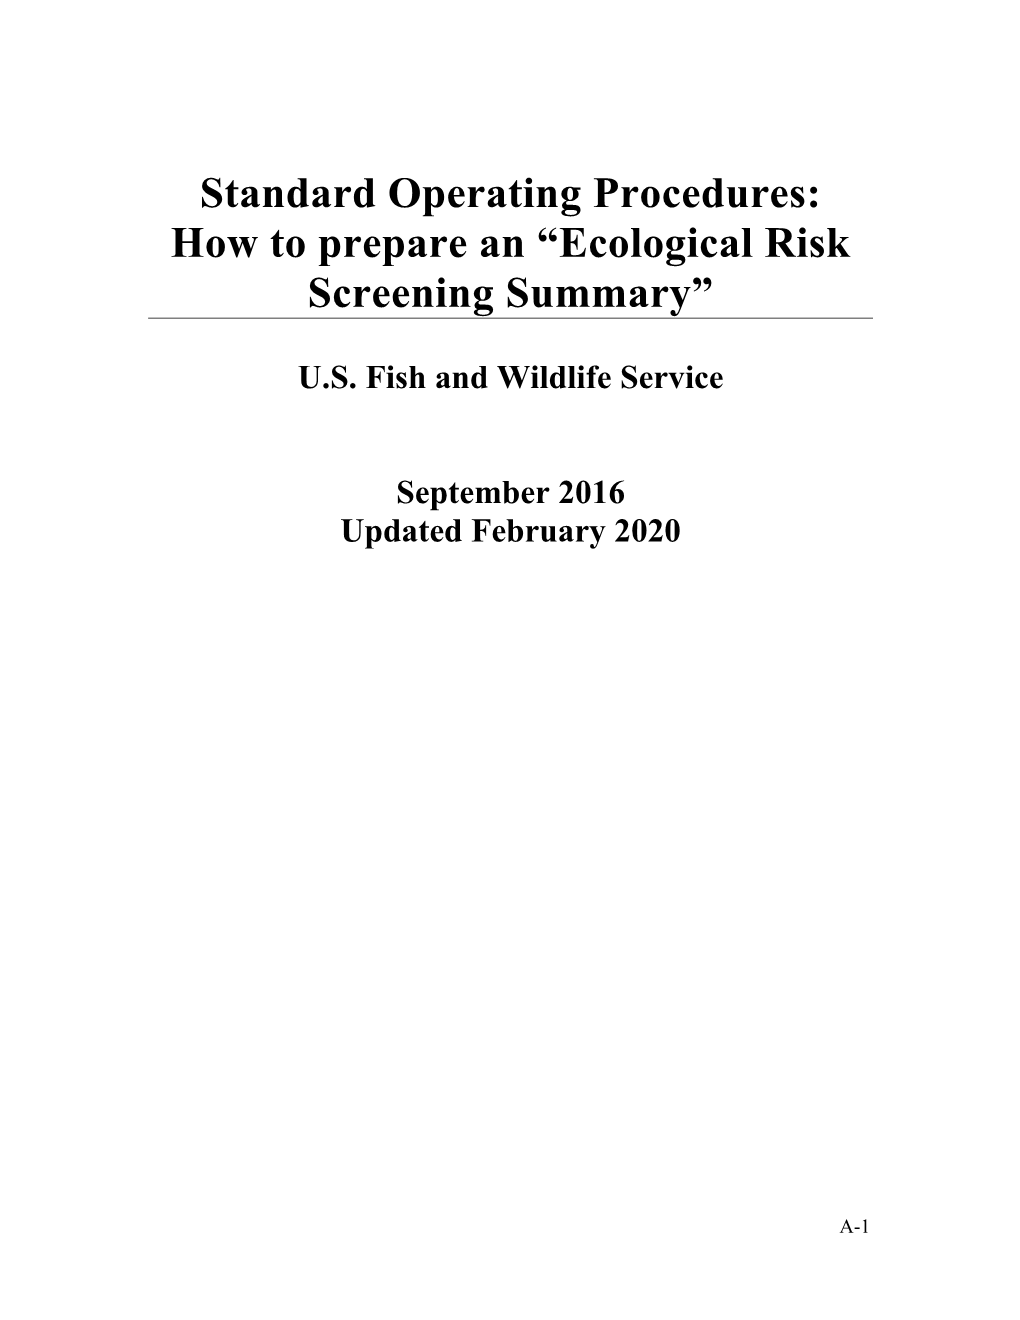 Standard Operating Procedures: How to Prepare an “Ecological Risk Screening Summary”